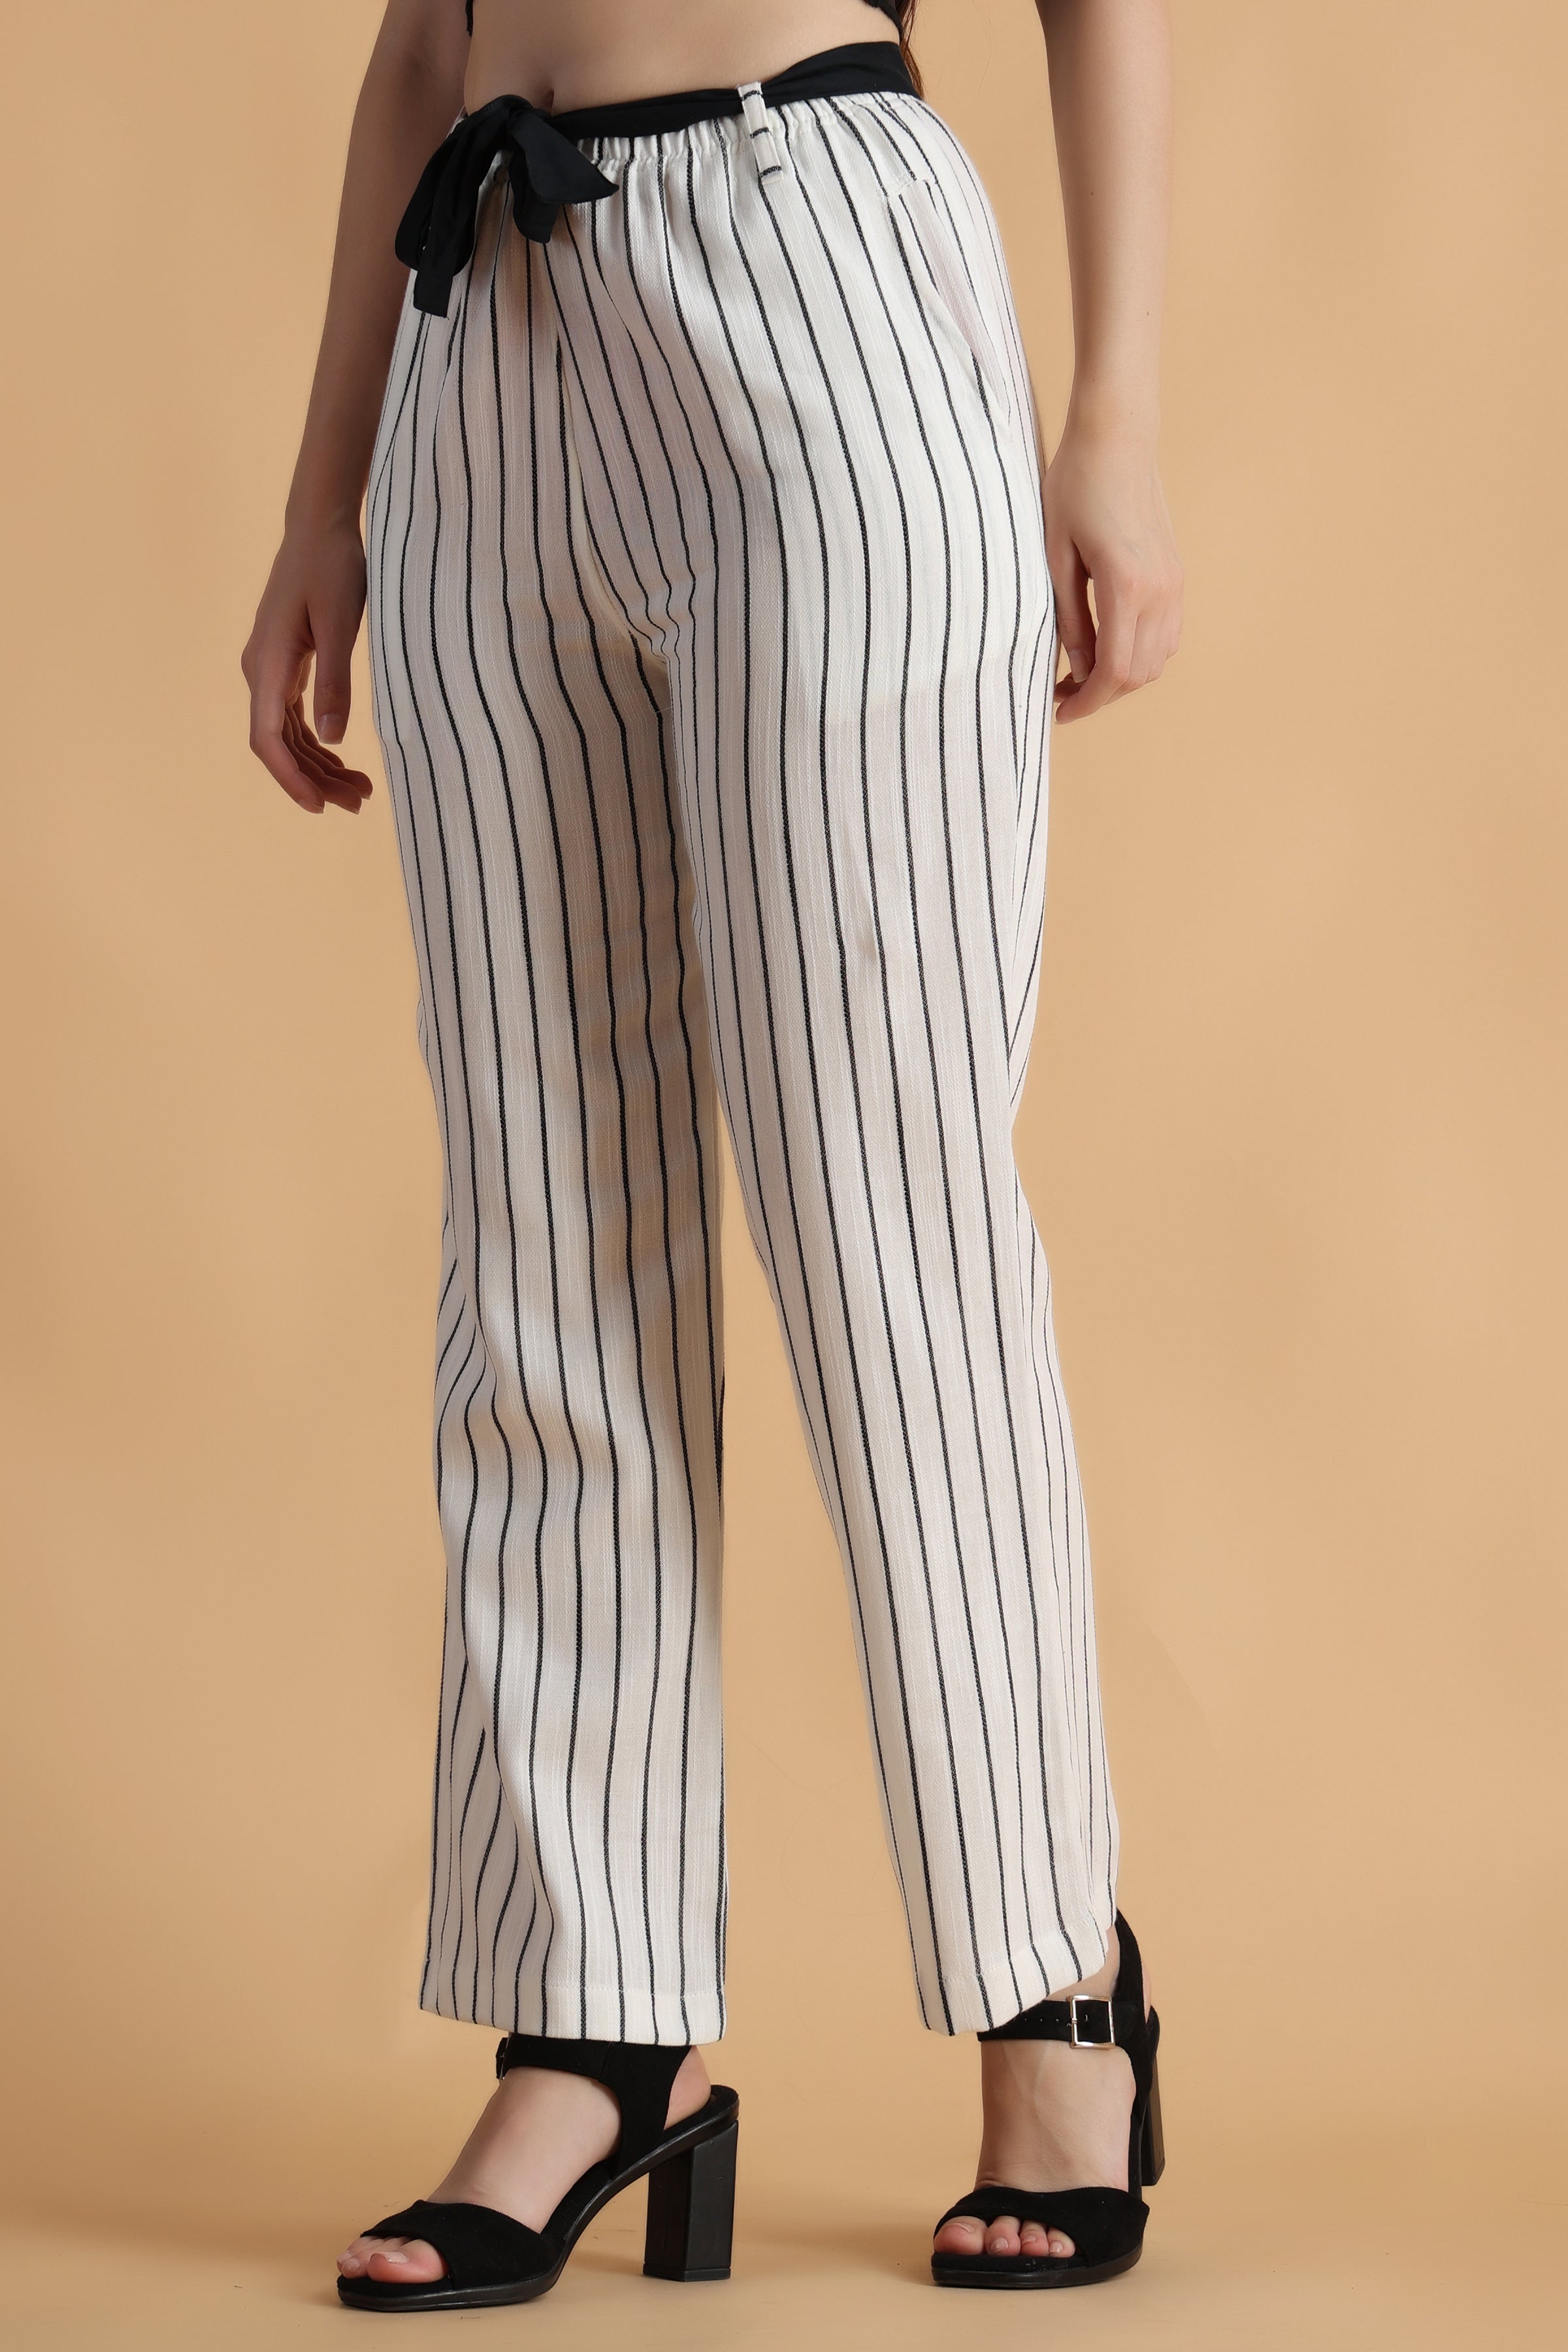 Xpose Trousers and Pants  Buy Xpose Women Navy Blue  White Regular Fit Striped  Trousers Online  Nykaa Fashion